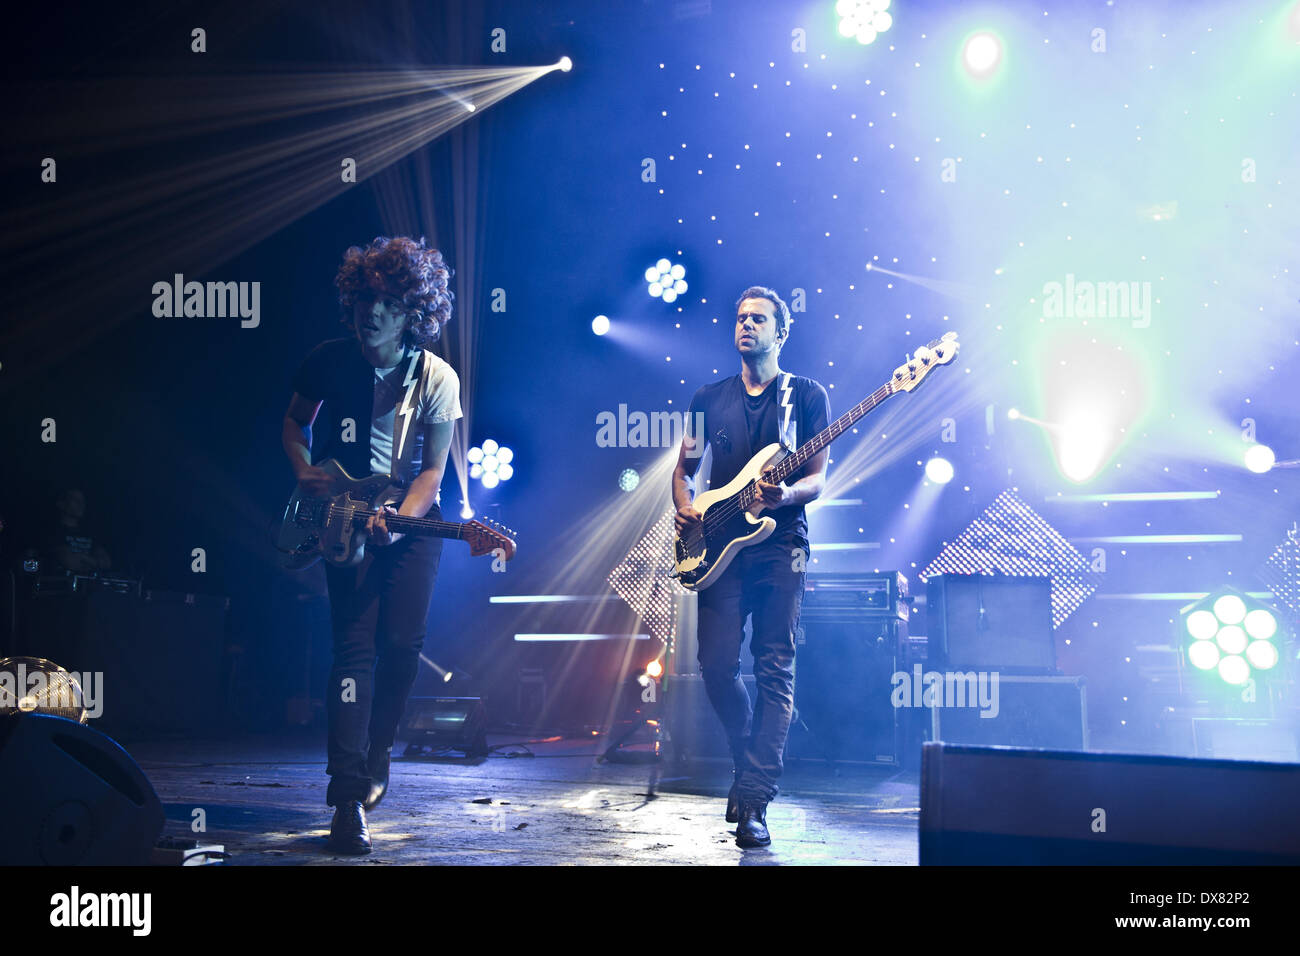 Jordan Lawlor (left) and Anthony Gonzalez of M83 performing live at ...